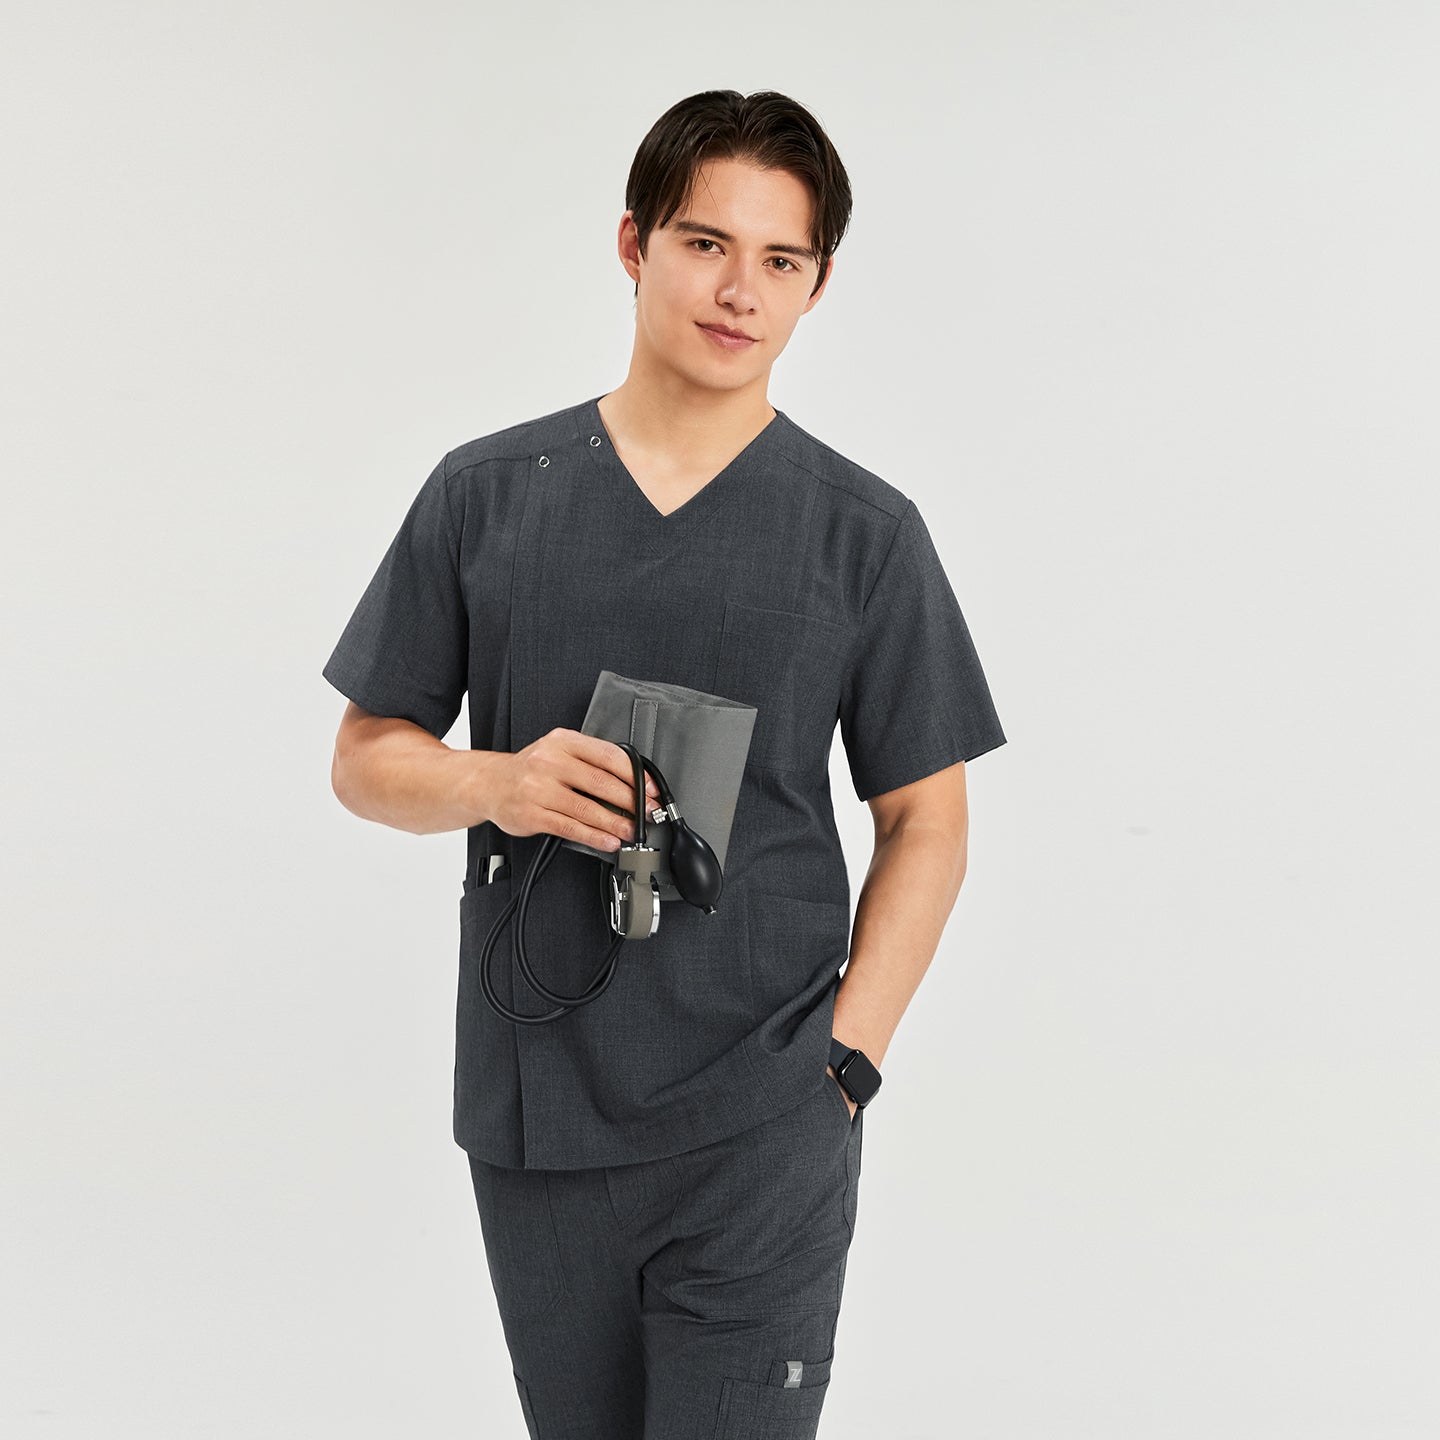 Man wearing a front zipper scrub top with matching cargo pants, holding a blood pressure monitor,Charcoal Gray